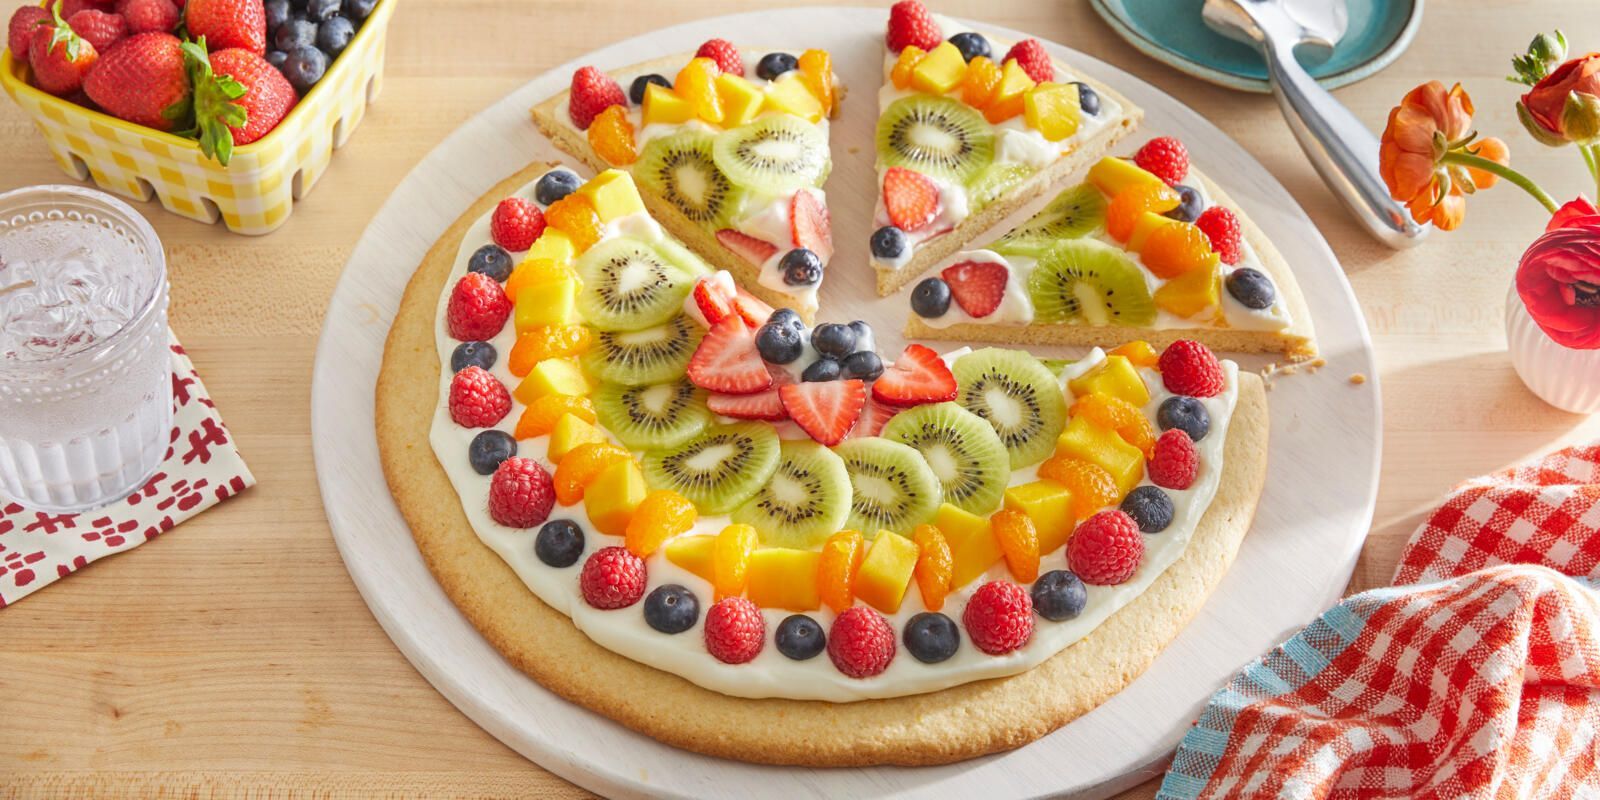 This Pizza Cake Recipe Is a Piece of Cake to Bake - Brit + Co